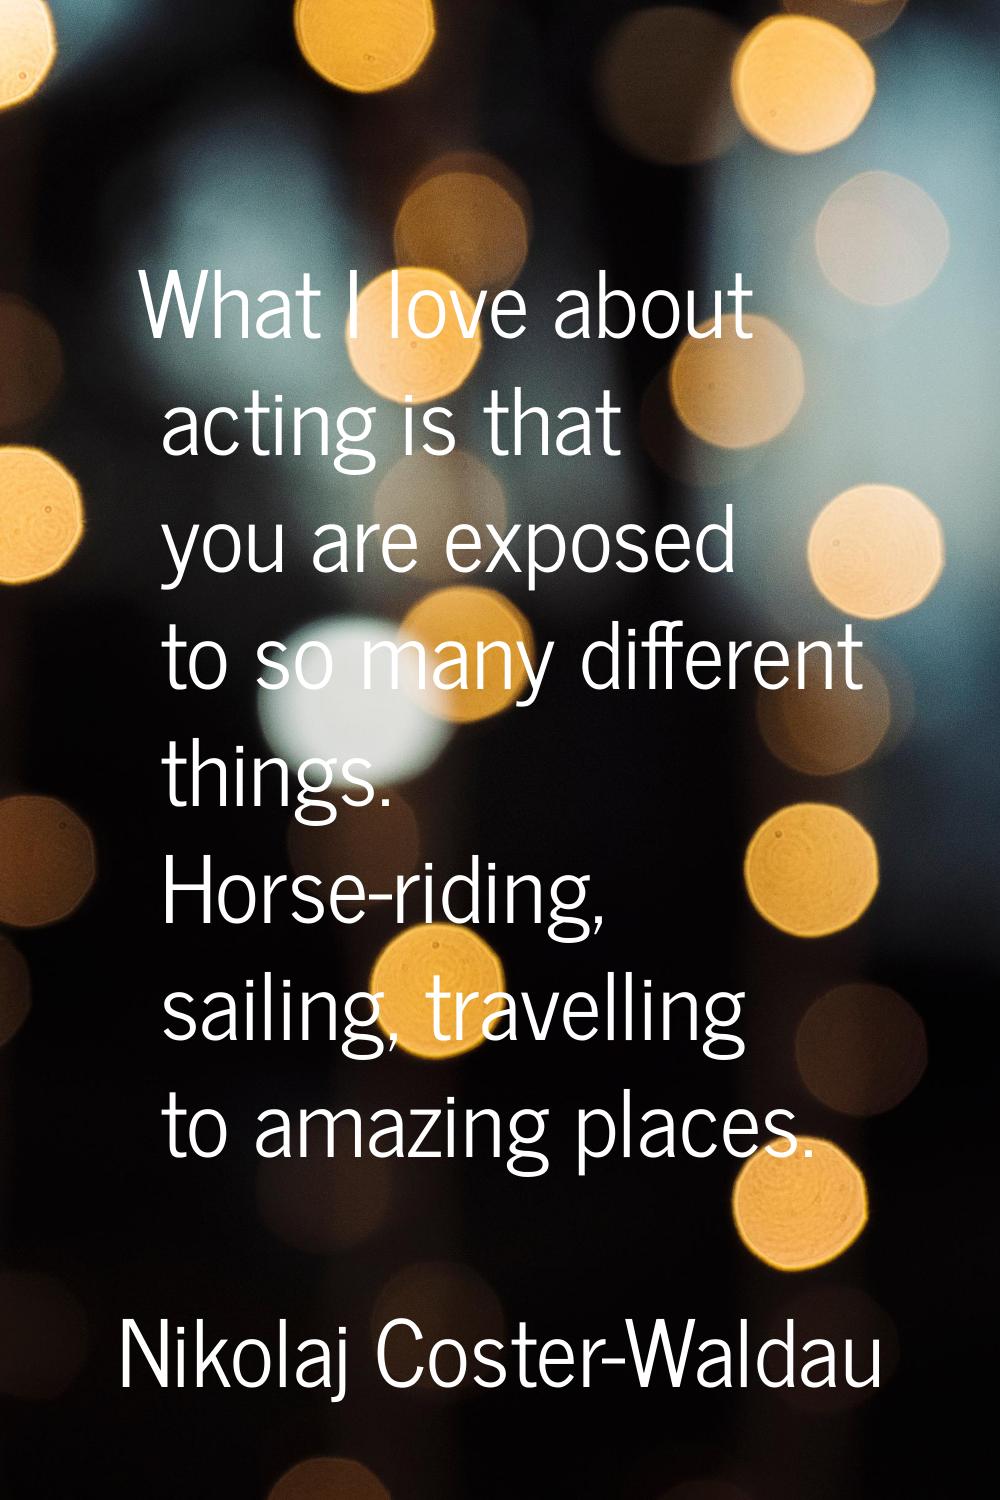 What I love about acting is that you are exposed to so many different things. Horse-riding, sailing